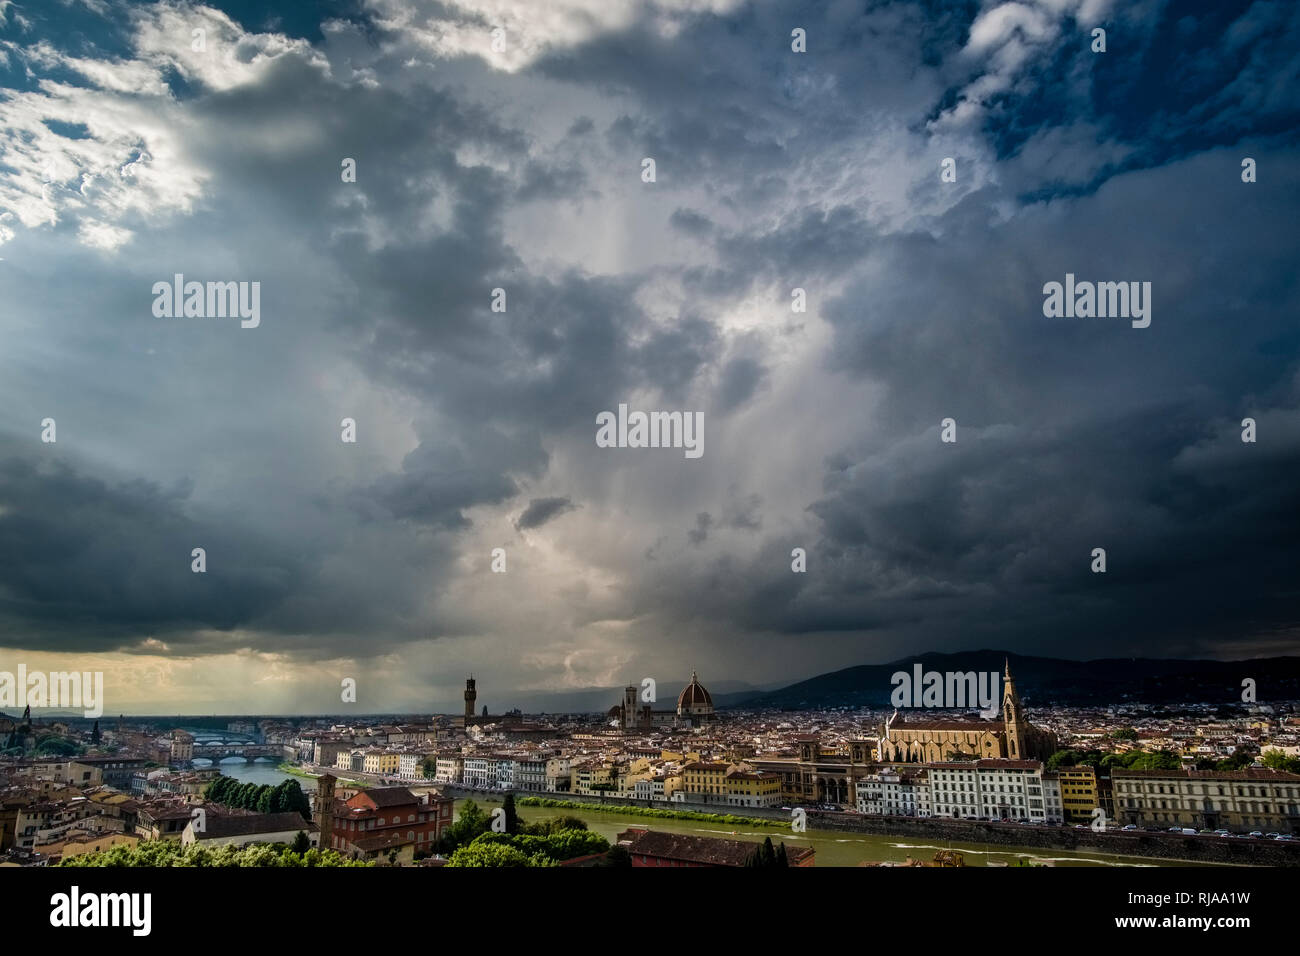 Panoramic aerial view on town from Piazza Michelangelo, dark thunderstorm clouds building up Stock Photo